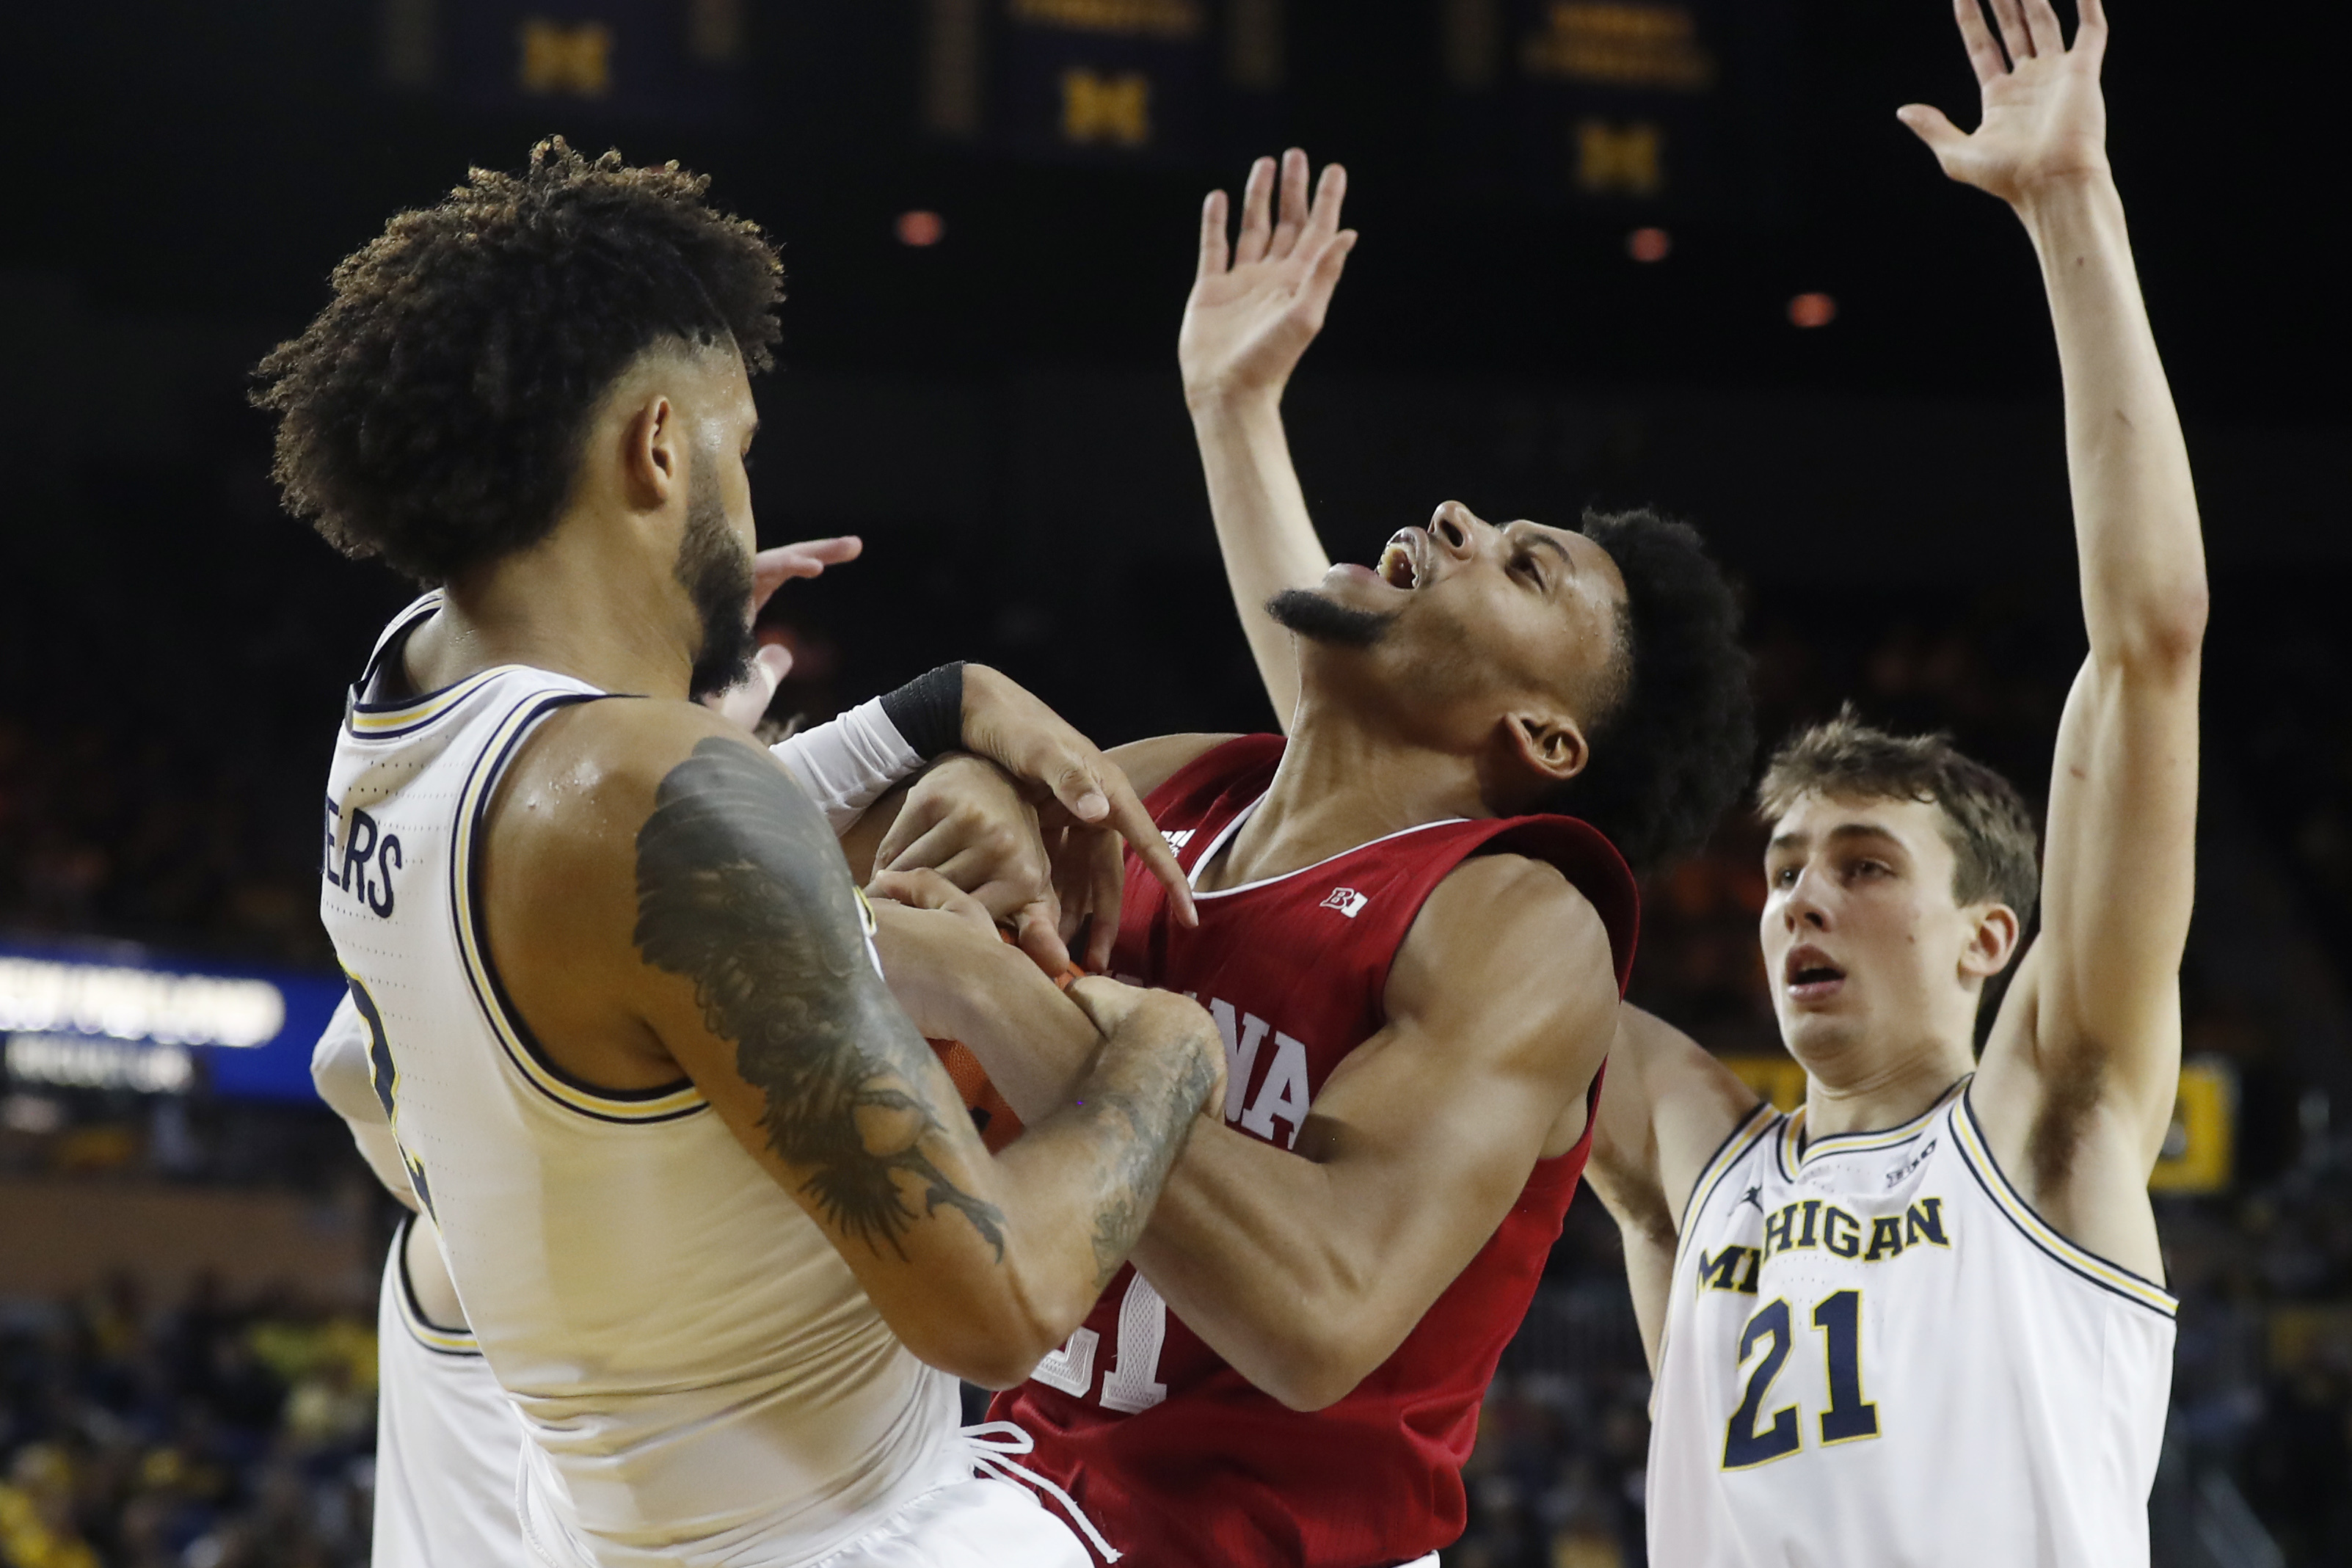 Michigan routs Indiana 89-65, helps NCAA Tournament chances